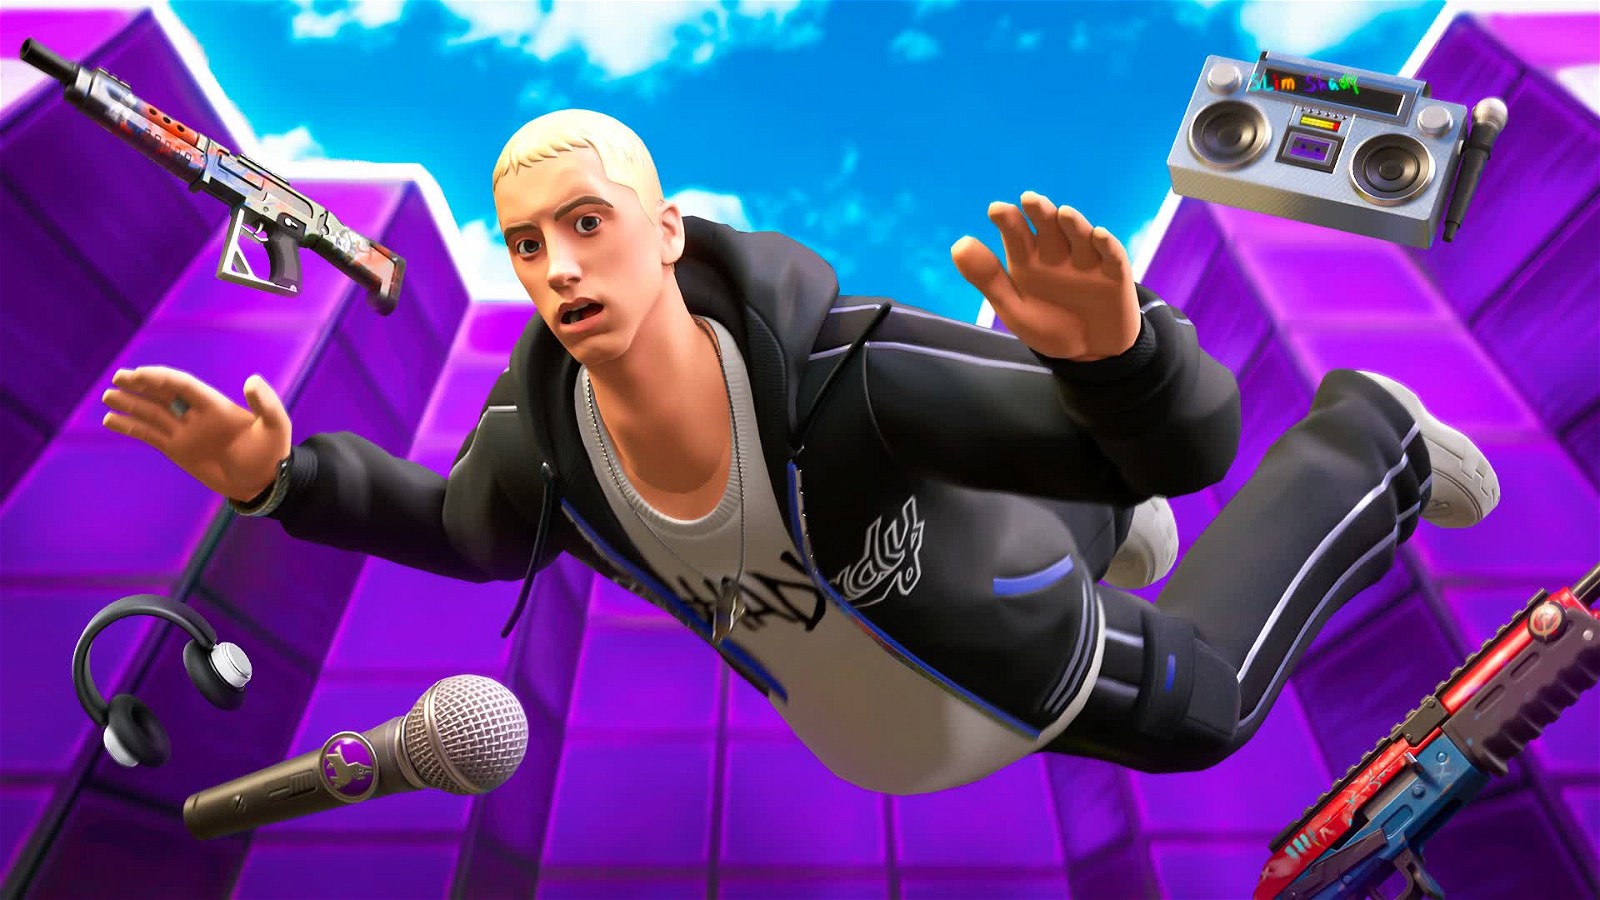 Eminem tool the stage in Fortnite last year.